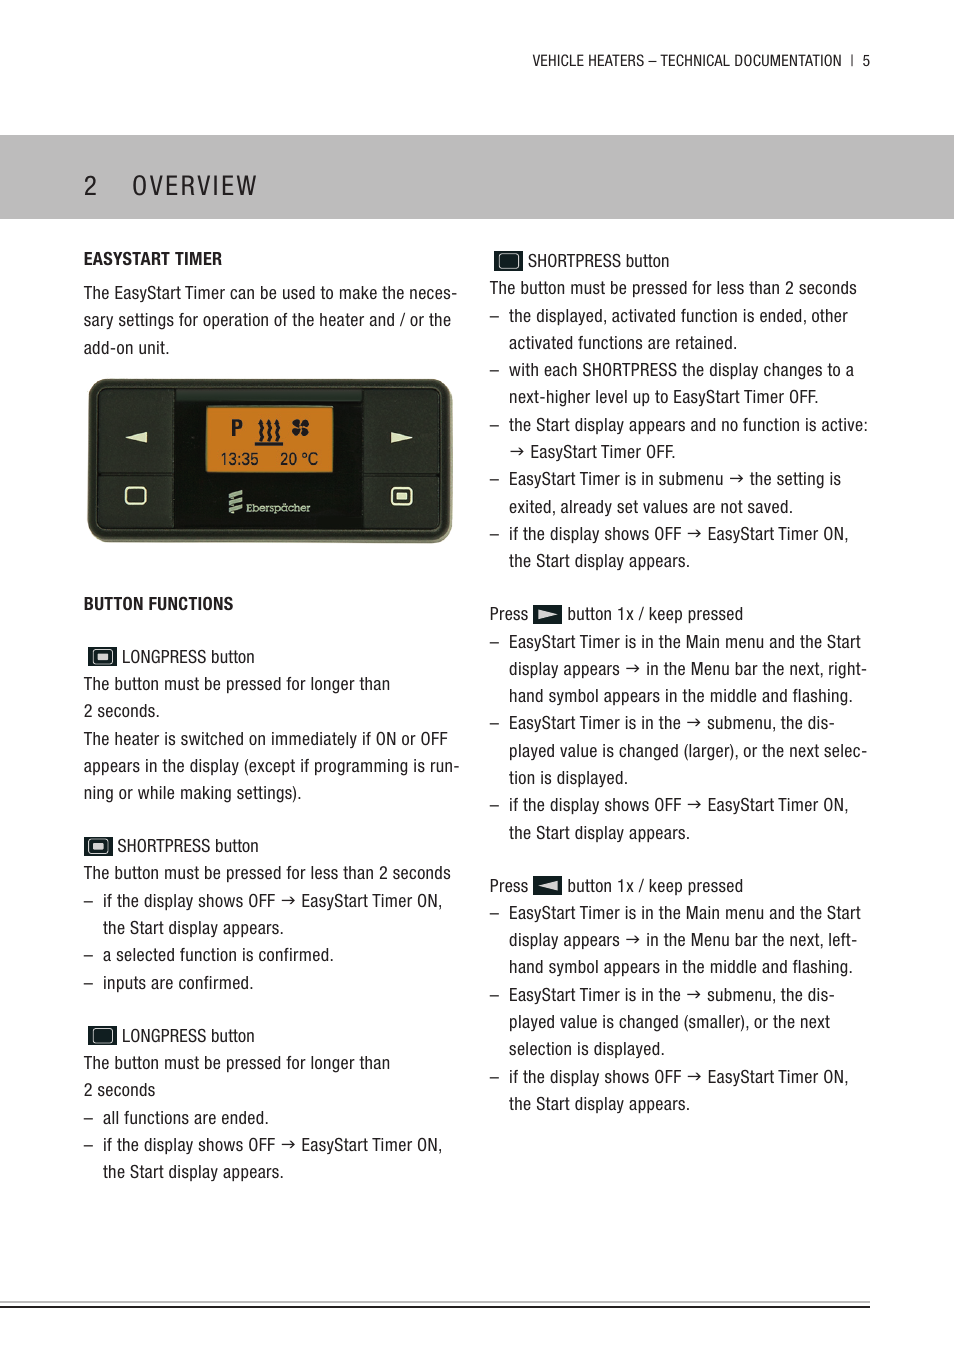 2 overview, Easystart timer, Button functions | Eberspacher EasyStart Timer  Operating instructions User Manual | Page 5 / 32